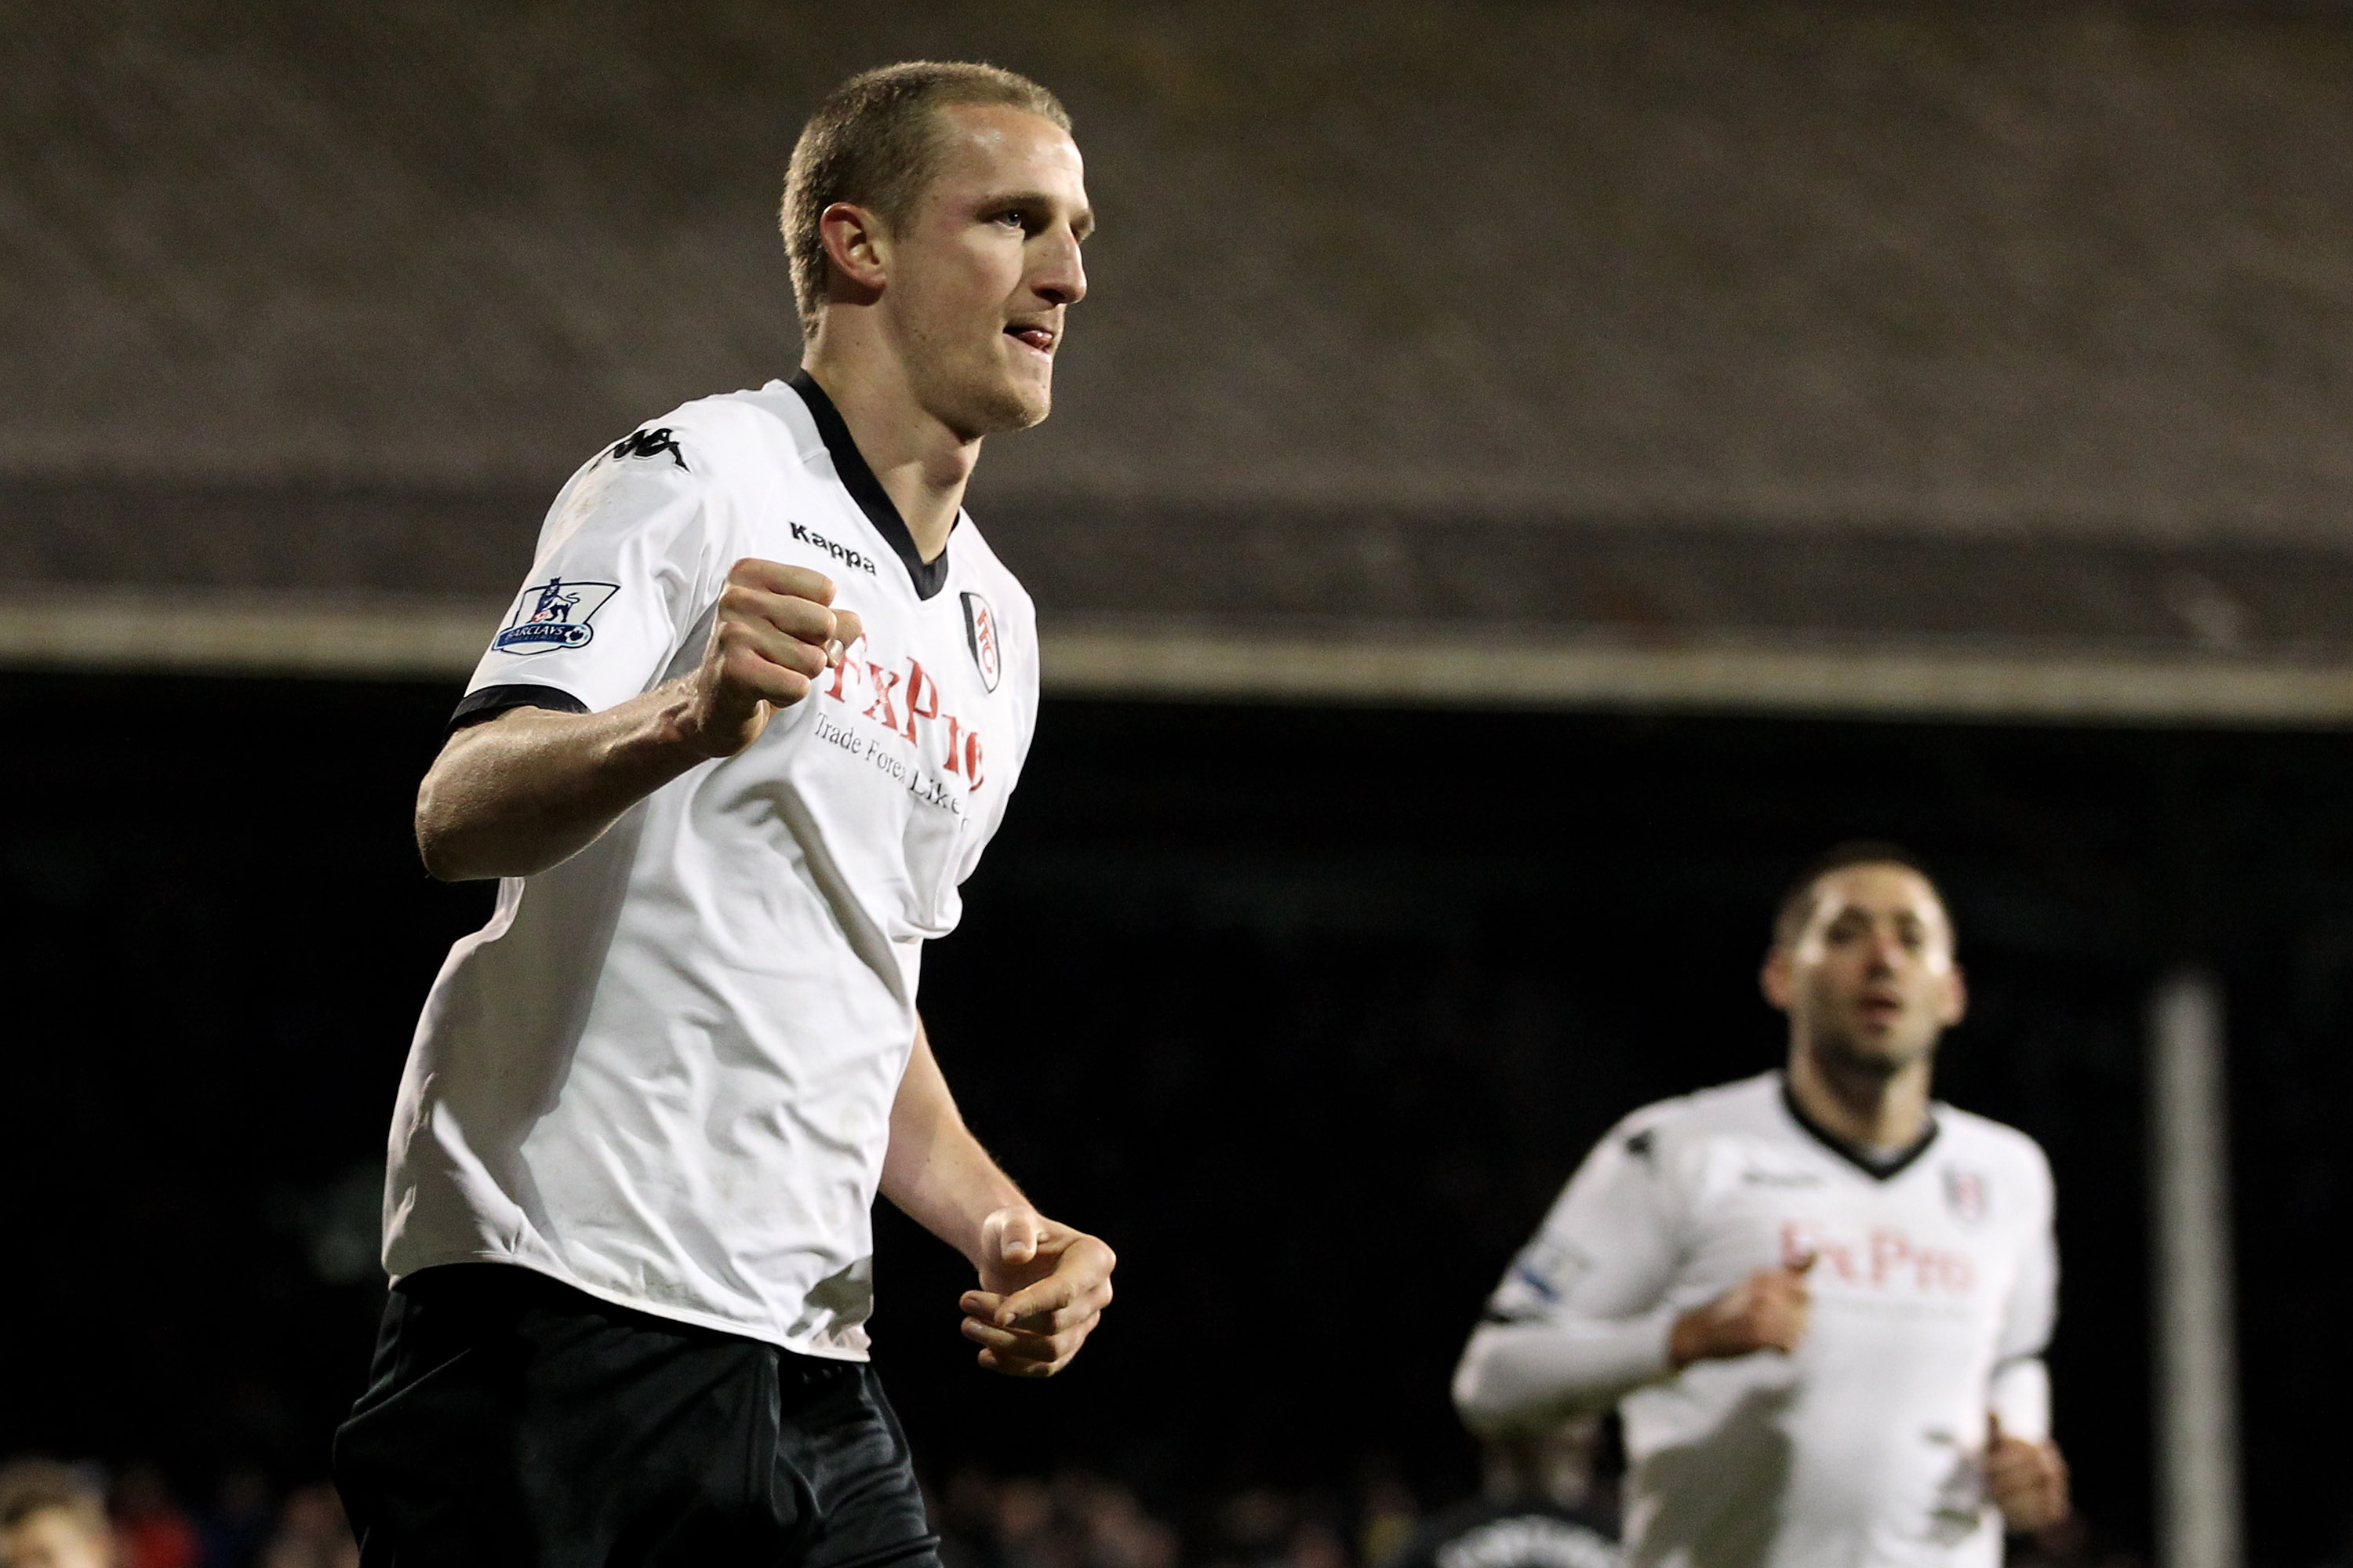 LONDON, ENGLAND - JANUARY 04:  Brede Hangeland of Fulham celebrates after scoring their third goal during the Barclays Premier League match between Fulham and West Bromwich Albion at Craven Cottage on January 4, 2011 in London, England.  (Photo by Scott H